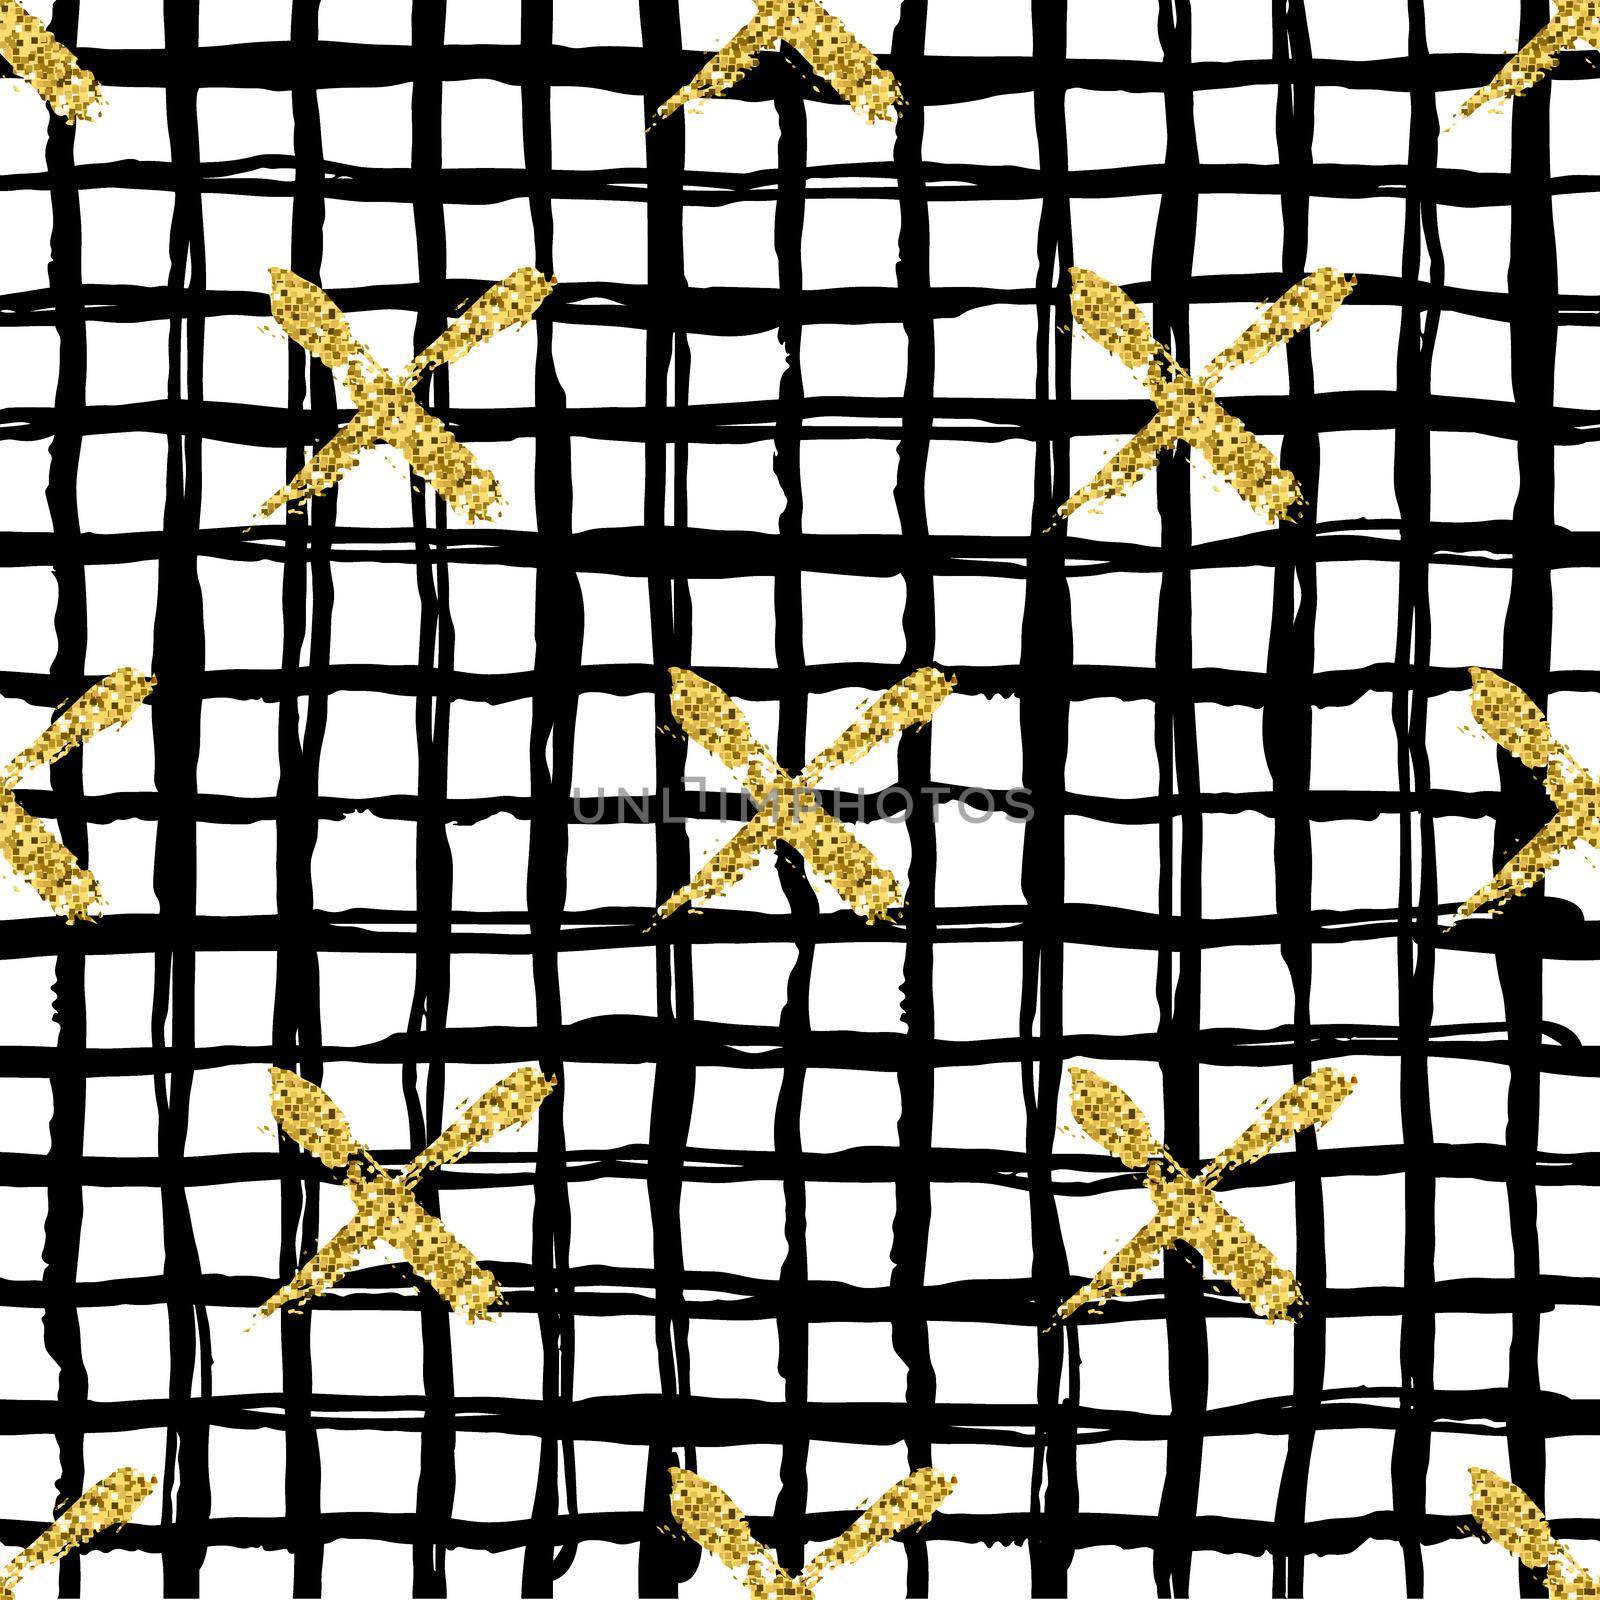 Modern seamless pattern with brush stripes plaid and cross. Black, gold metallic color on white background. Golden glitter texture. Ink geometric elements. Fashion catwalk style. Repeat fabric cloth by DesignAB